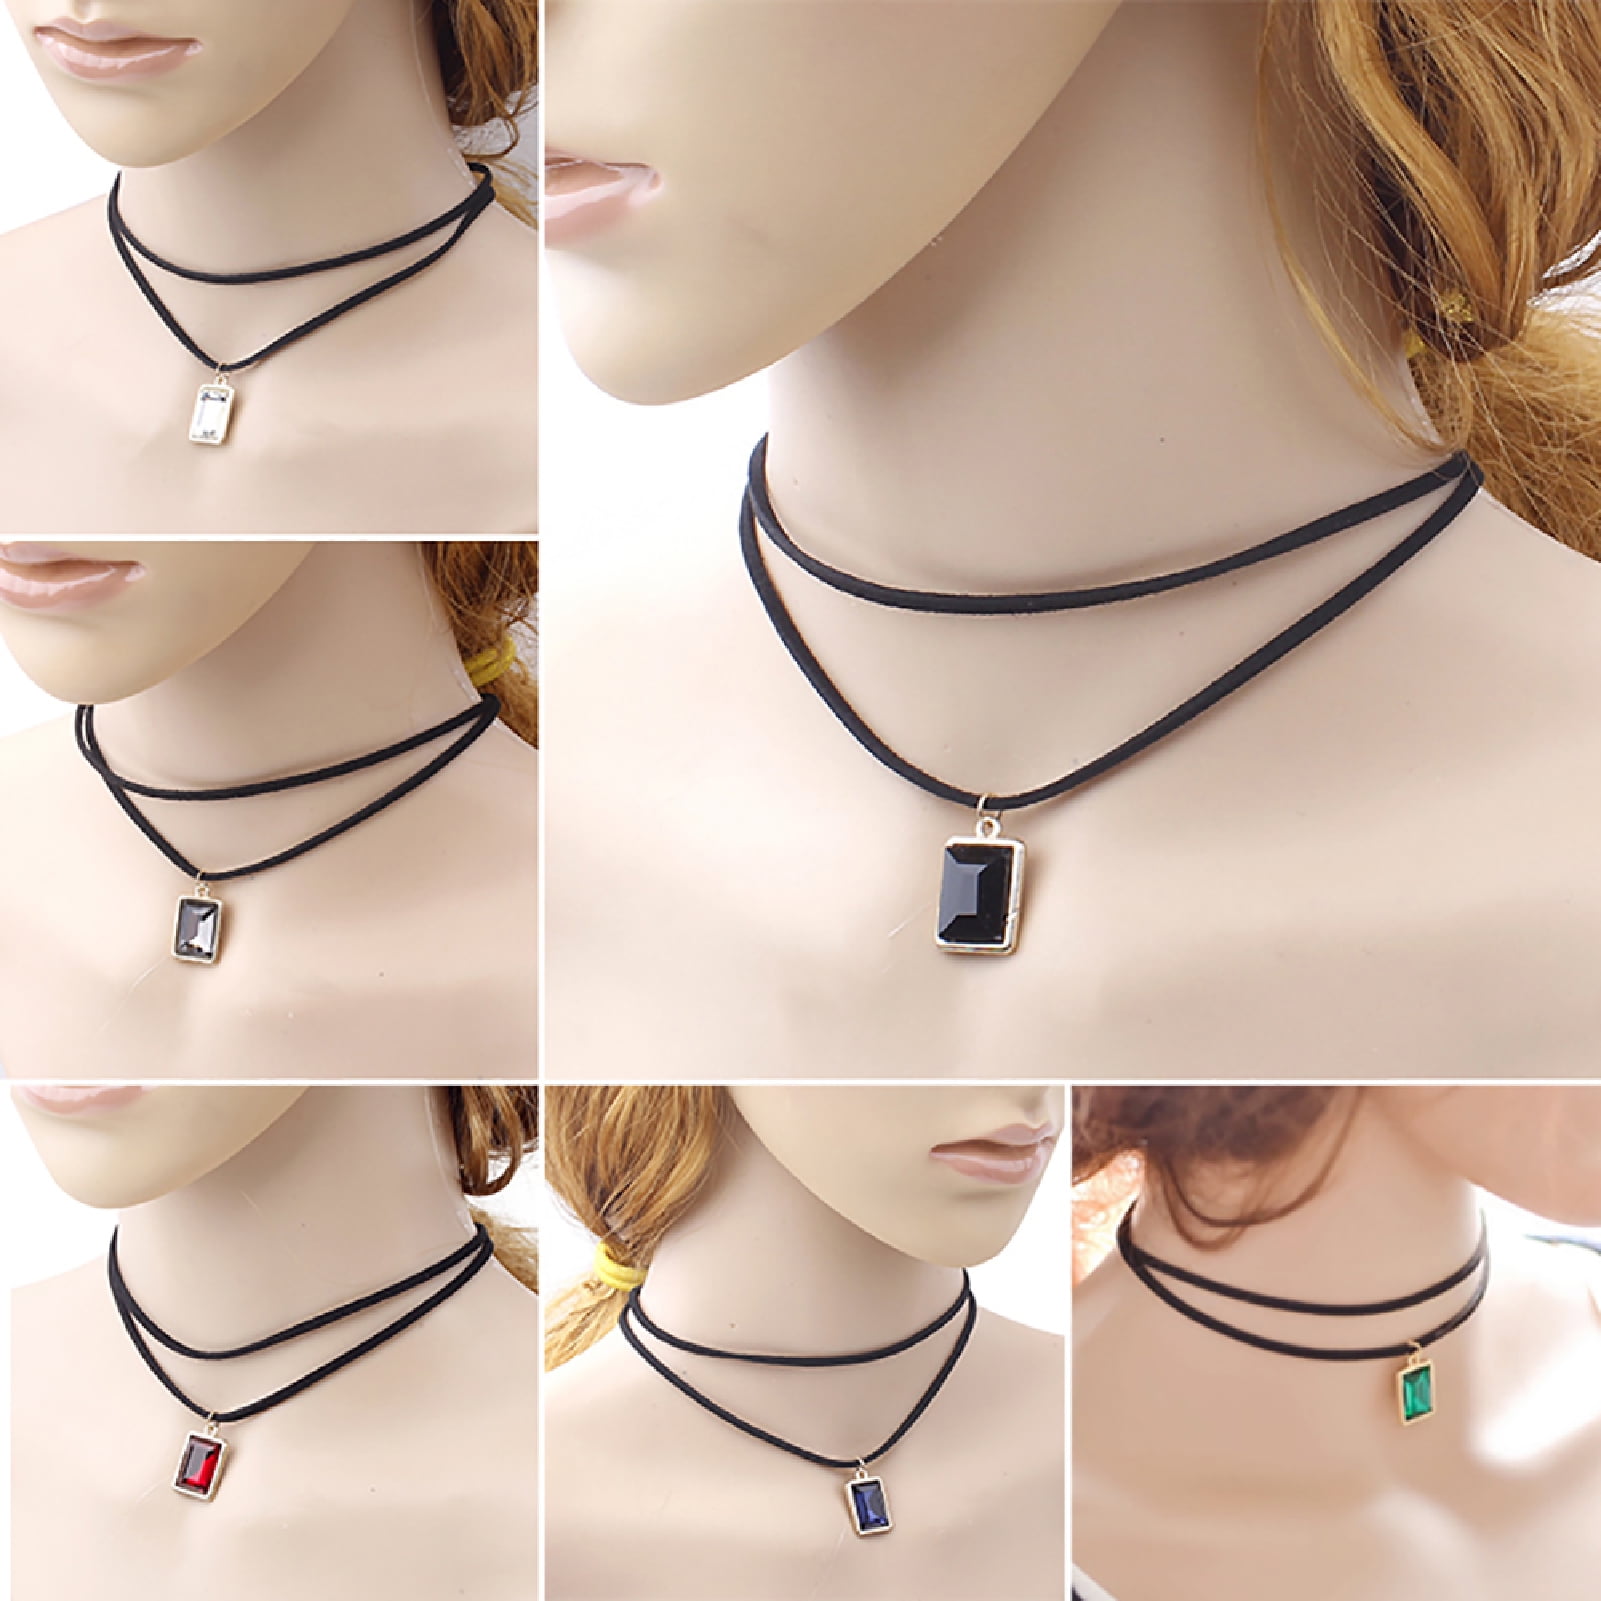 Graeen Black Choker Necklaces Adjustable Leather Chokers Clavicle Necklace  Jewelry for Women and Girls